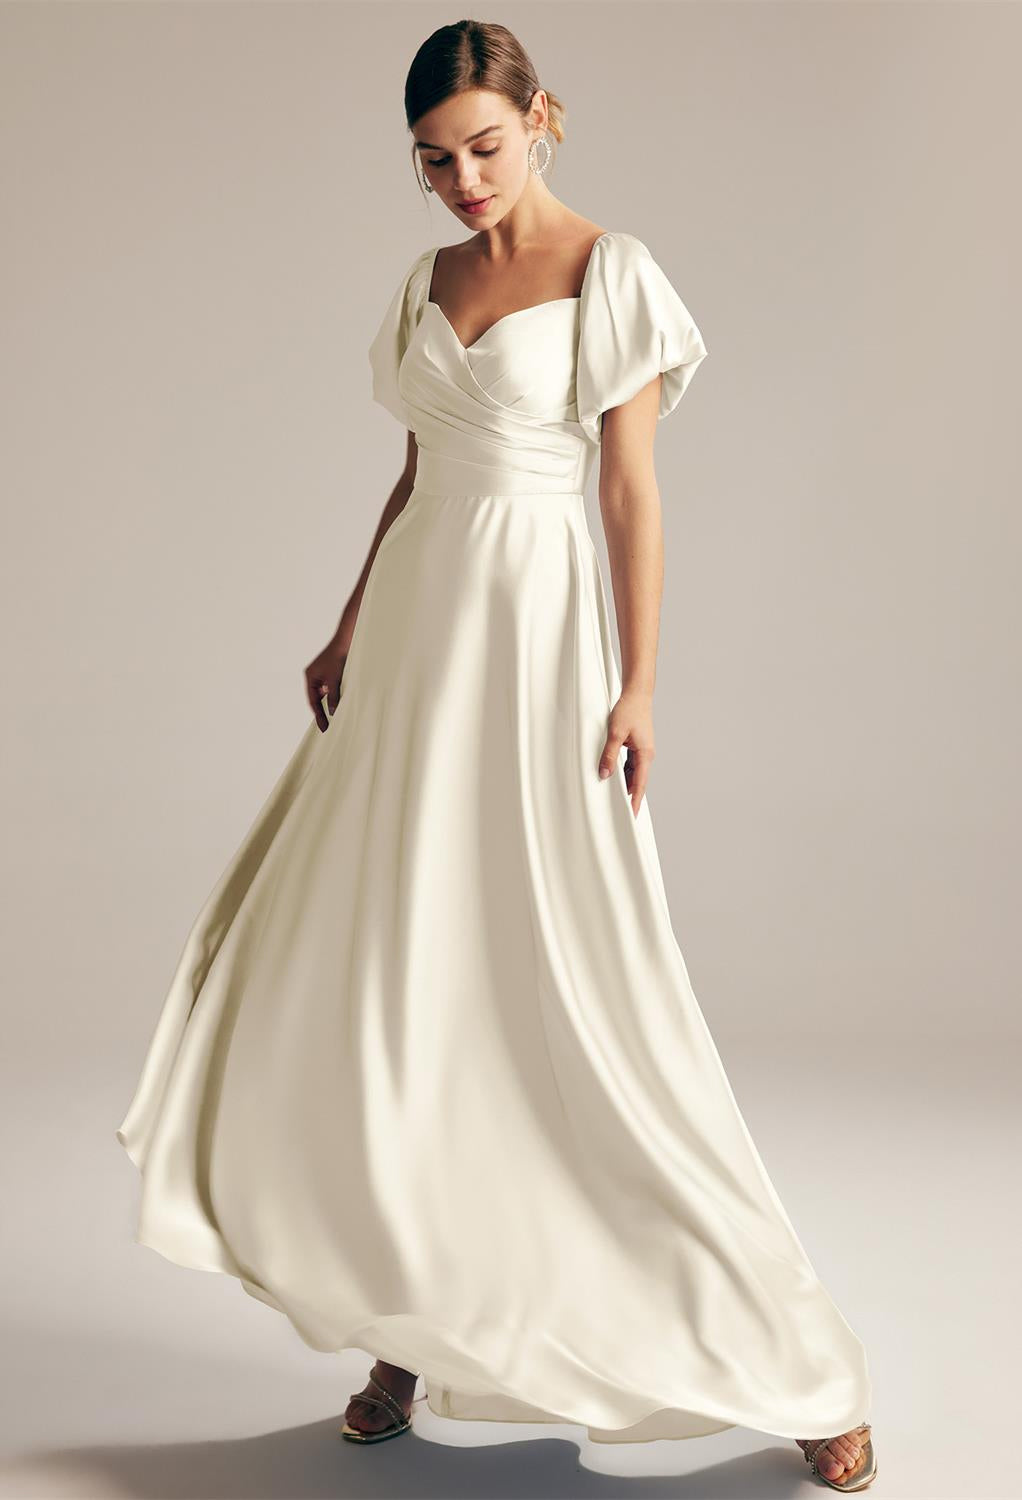 The bride is wearing a white Dey - Satin Charmeuse Bridesmaid Dress - Off The Rack purchased from Bergamot Bridal in London.